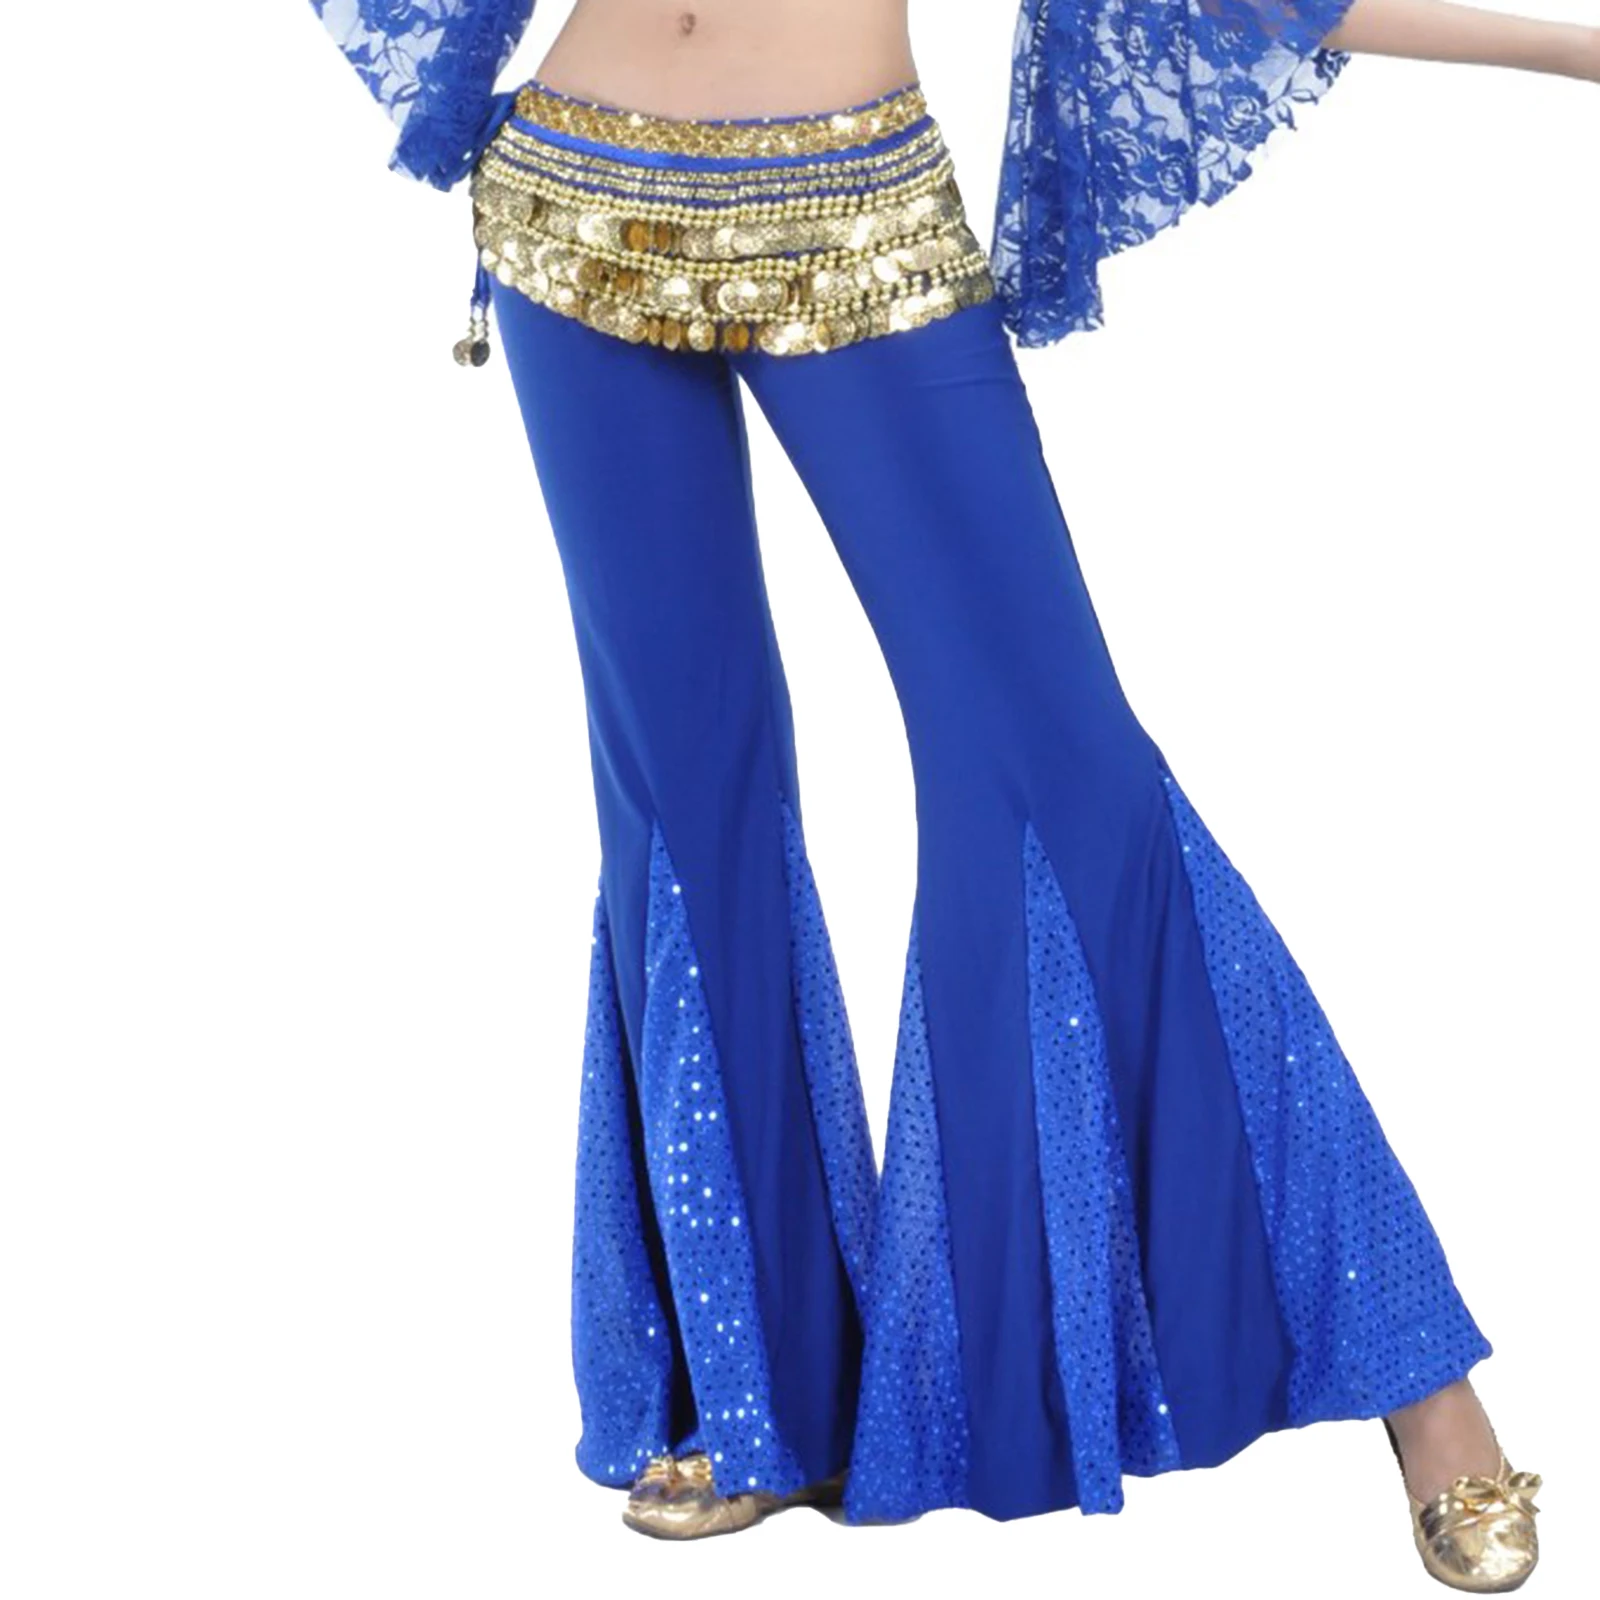 

Women Belly Dance Clothes Shiny Indian Dance Fishtail Pants Low Rise Bell-Bottoms Flared Trousers Bellydance Performance Costume